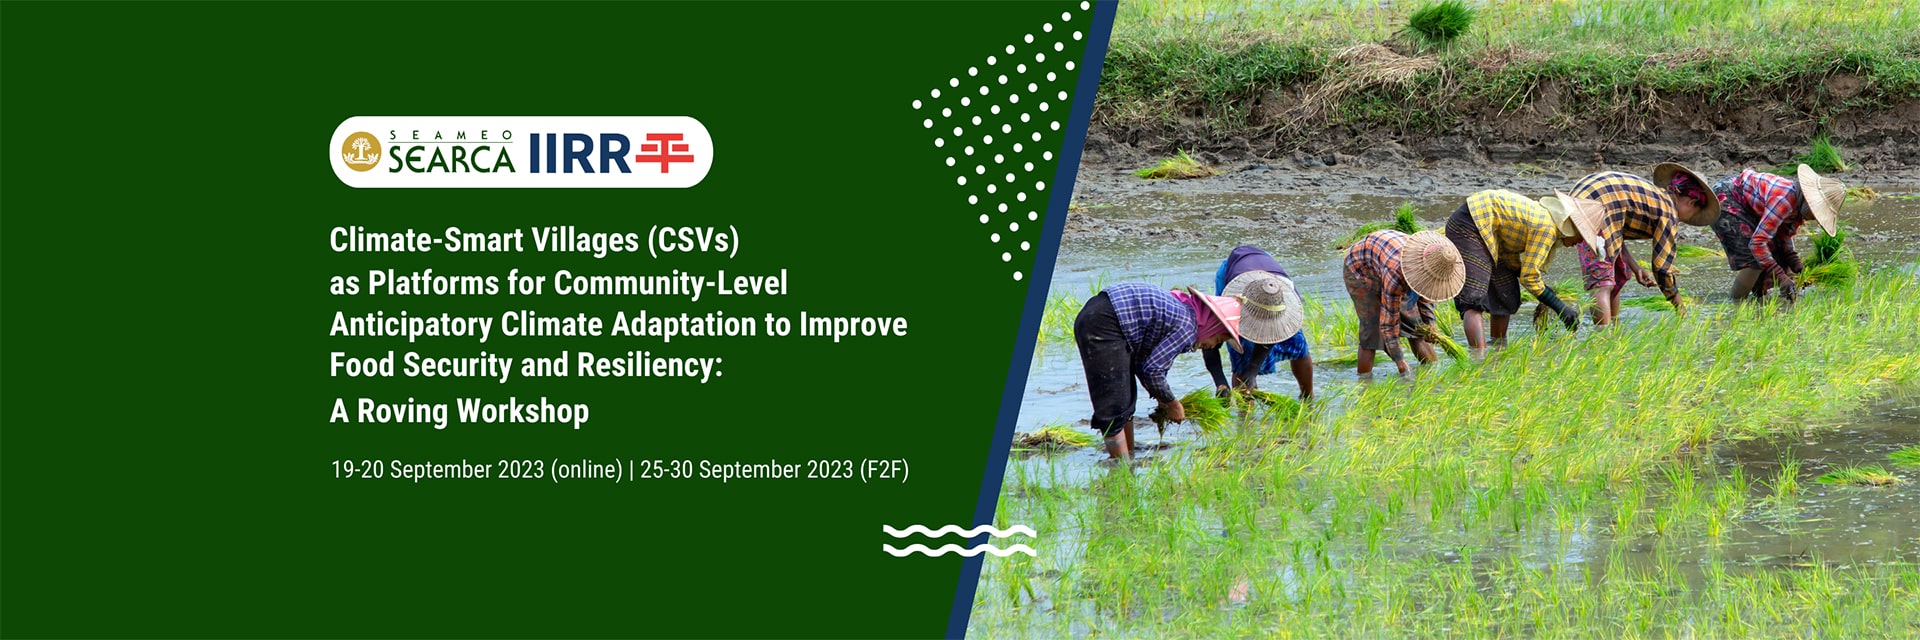 CSVs as Platforms for Community-Level Anticipatory Climate Adaptation to Improve Food Security and Resiliency